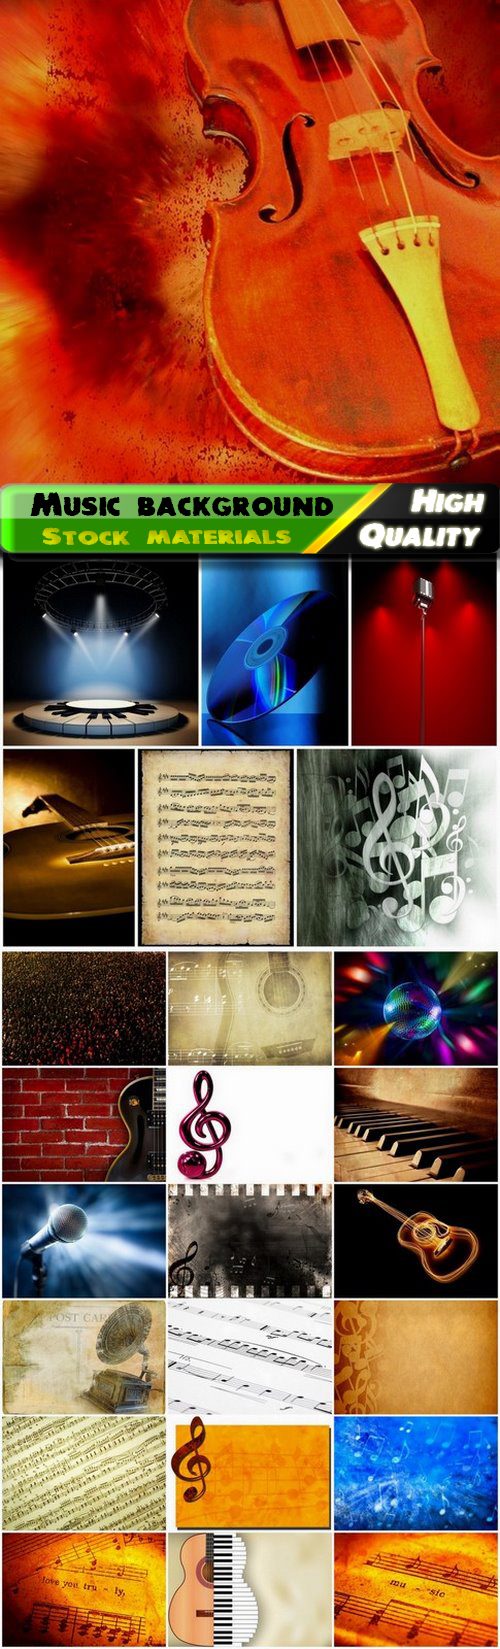 Music background with notes and musical instrument - 25 HQ Jpg